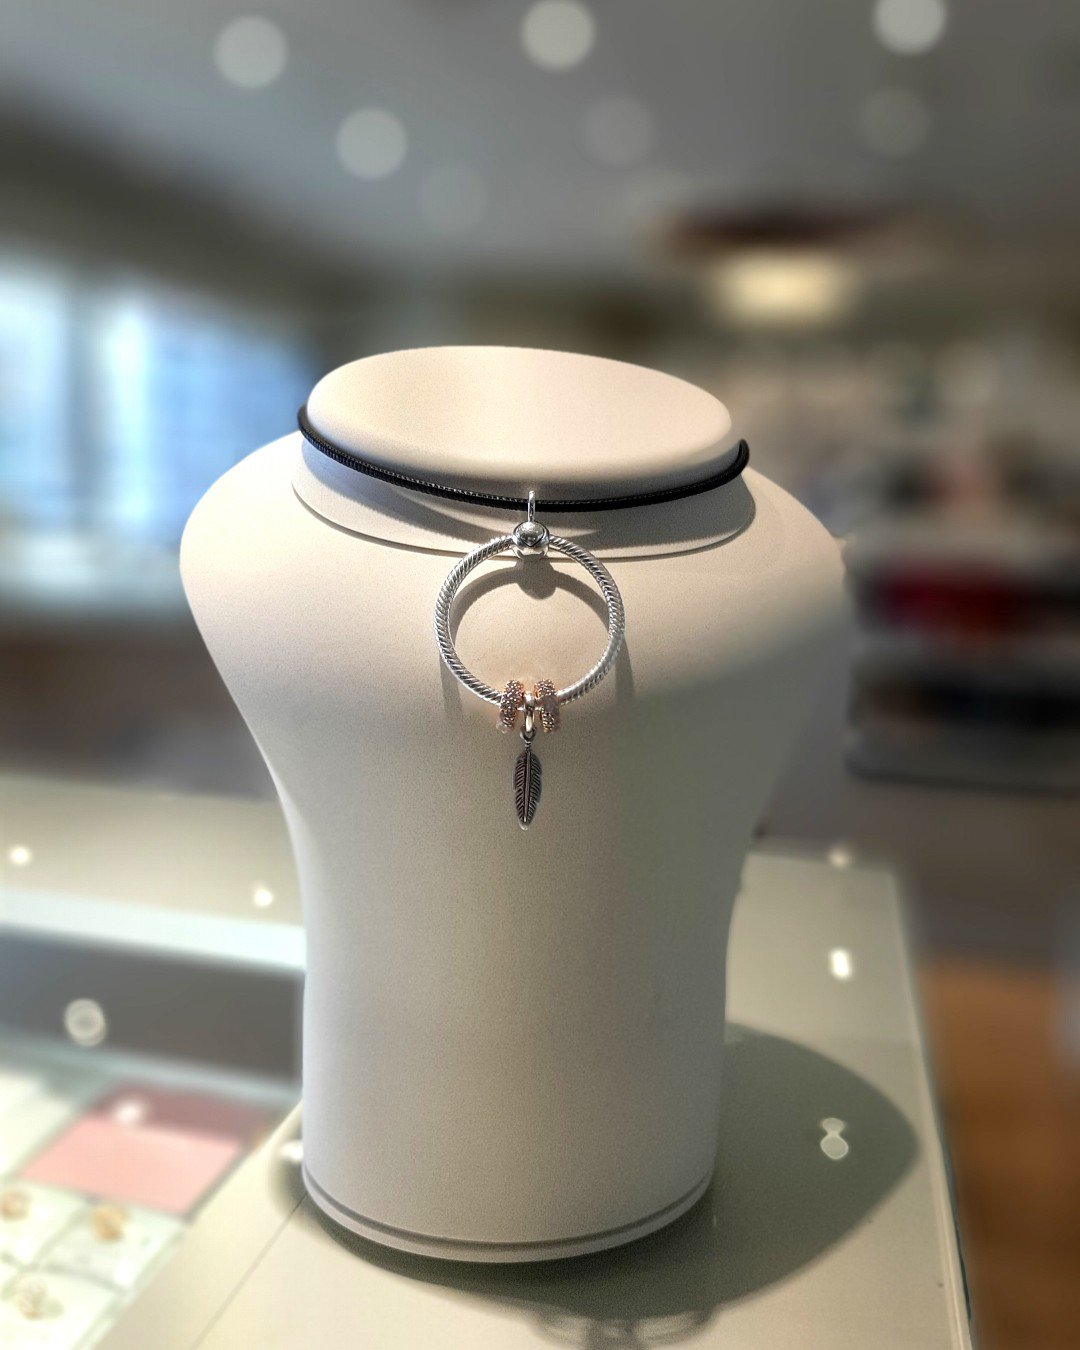 Pandora - Take a peek at our new limited edition choker in 18k gold-plated  sterling silver, available in selected PANDORA Concept Stores and online  soon. Elegant and luxurious, its eye-catching design is